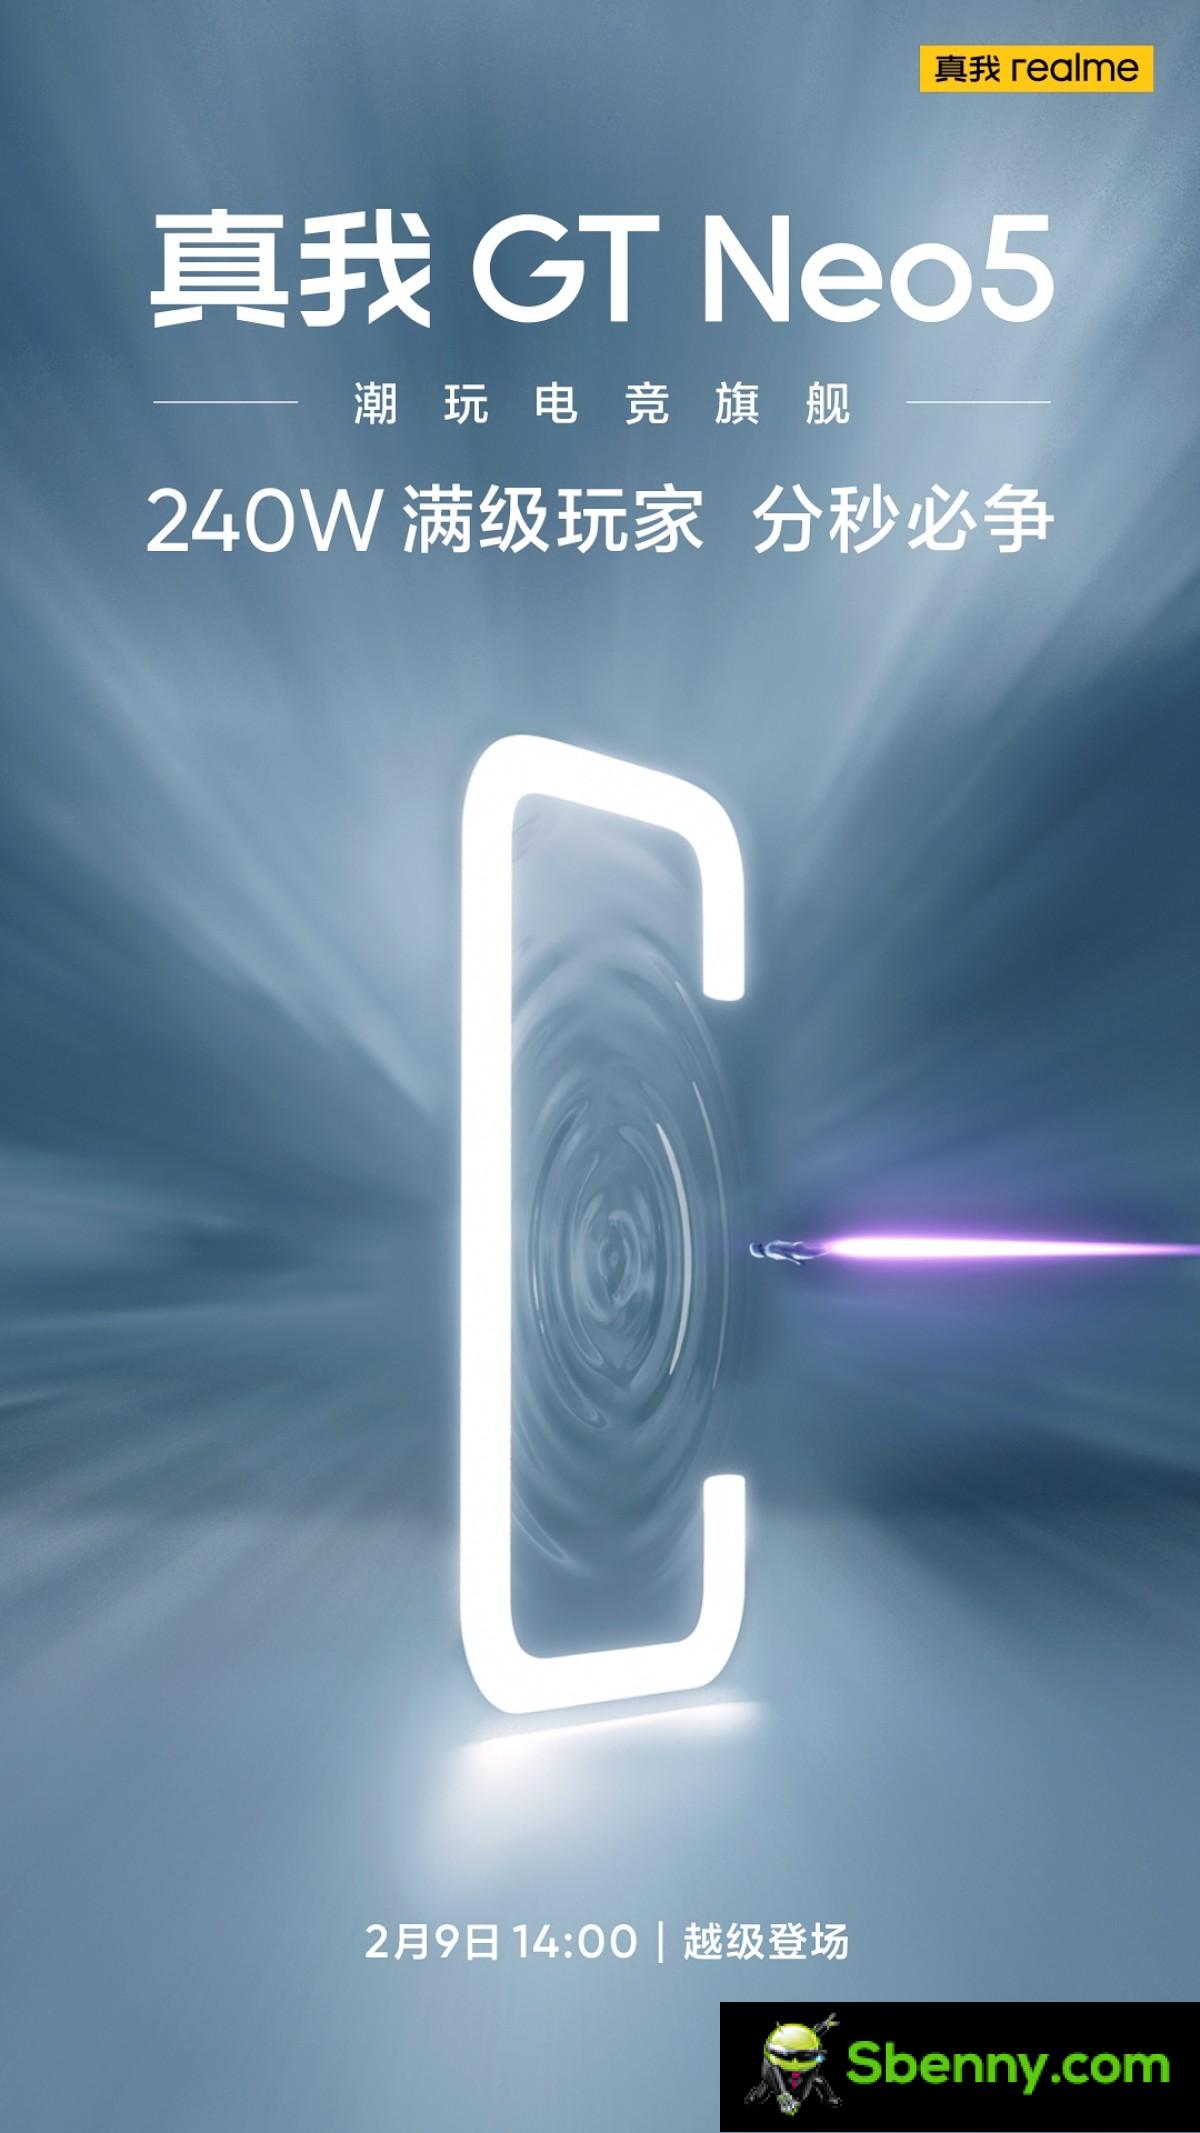 Realme GT Neo5 with 240W charging will arrive on February 9th